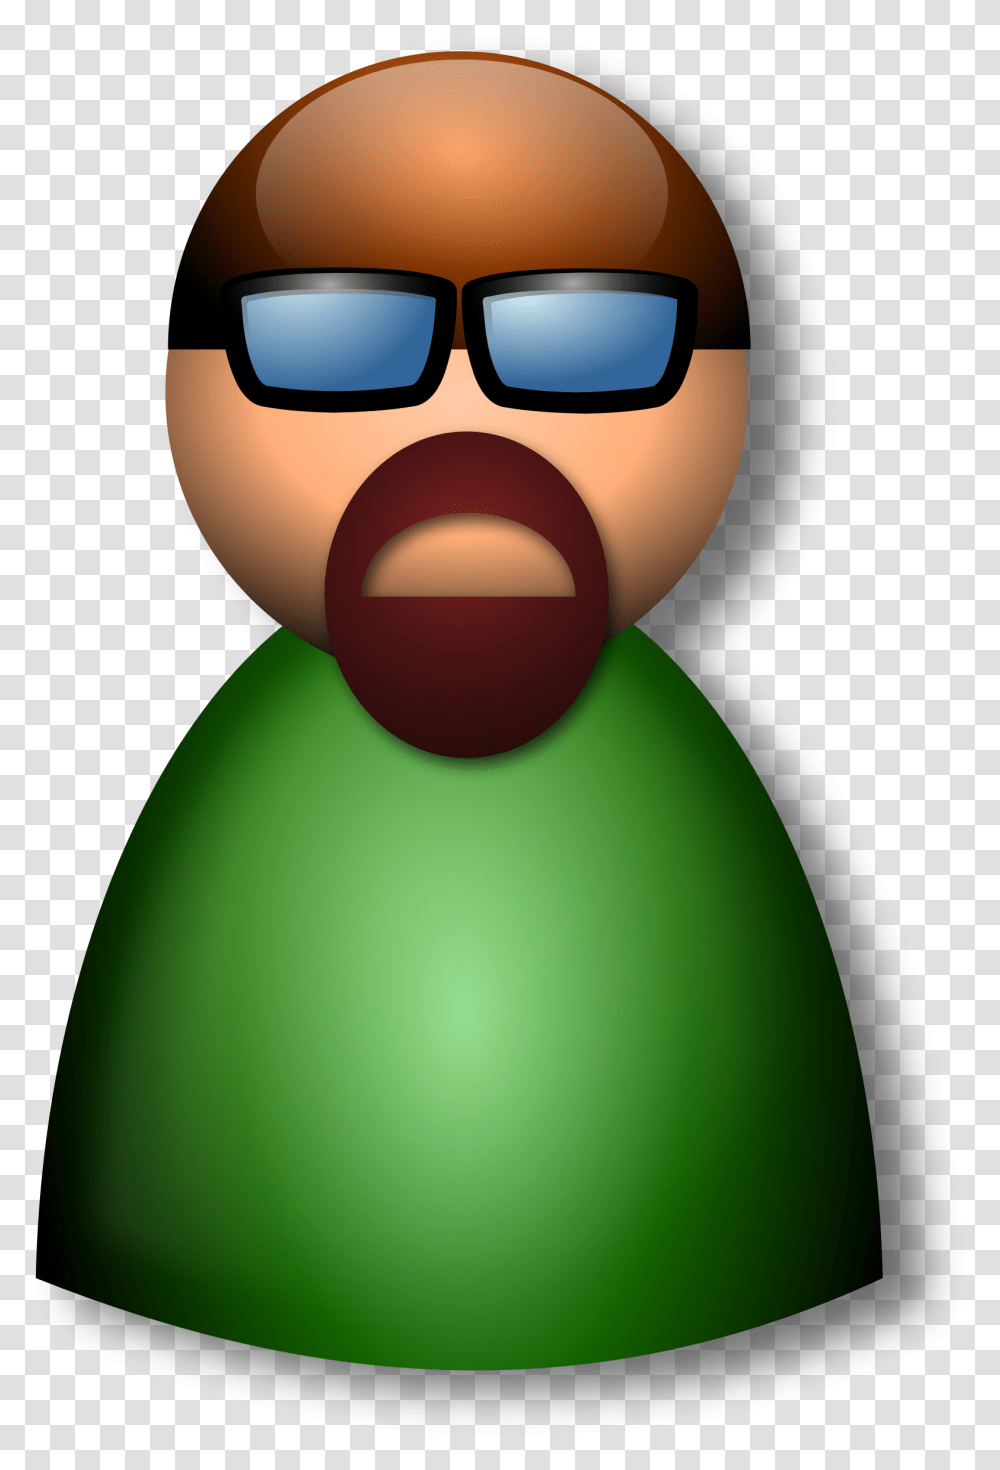 User Icon Remix Clip Arts Bald And Beard With Sun Glasses, Sunglasses, Accessories, Accessory, Head Transparent Png